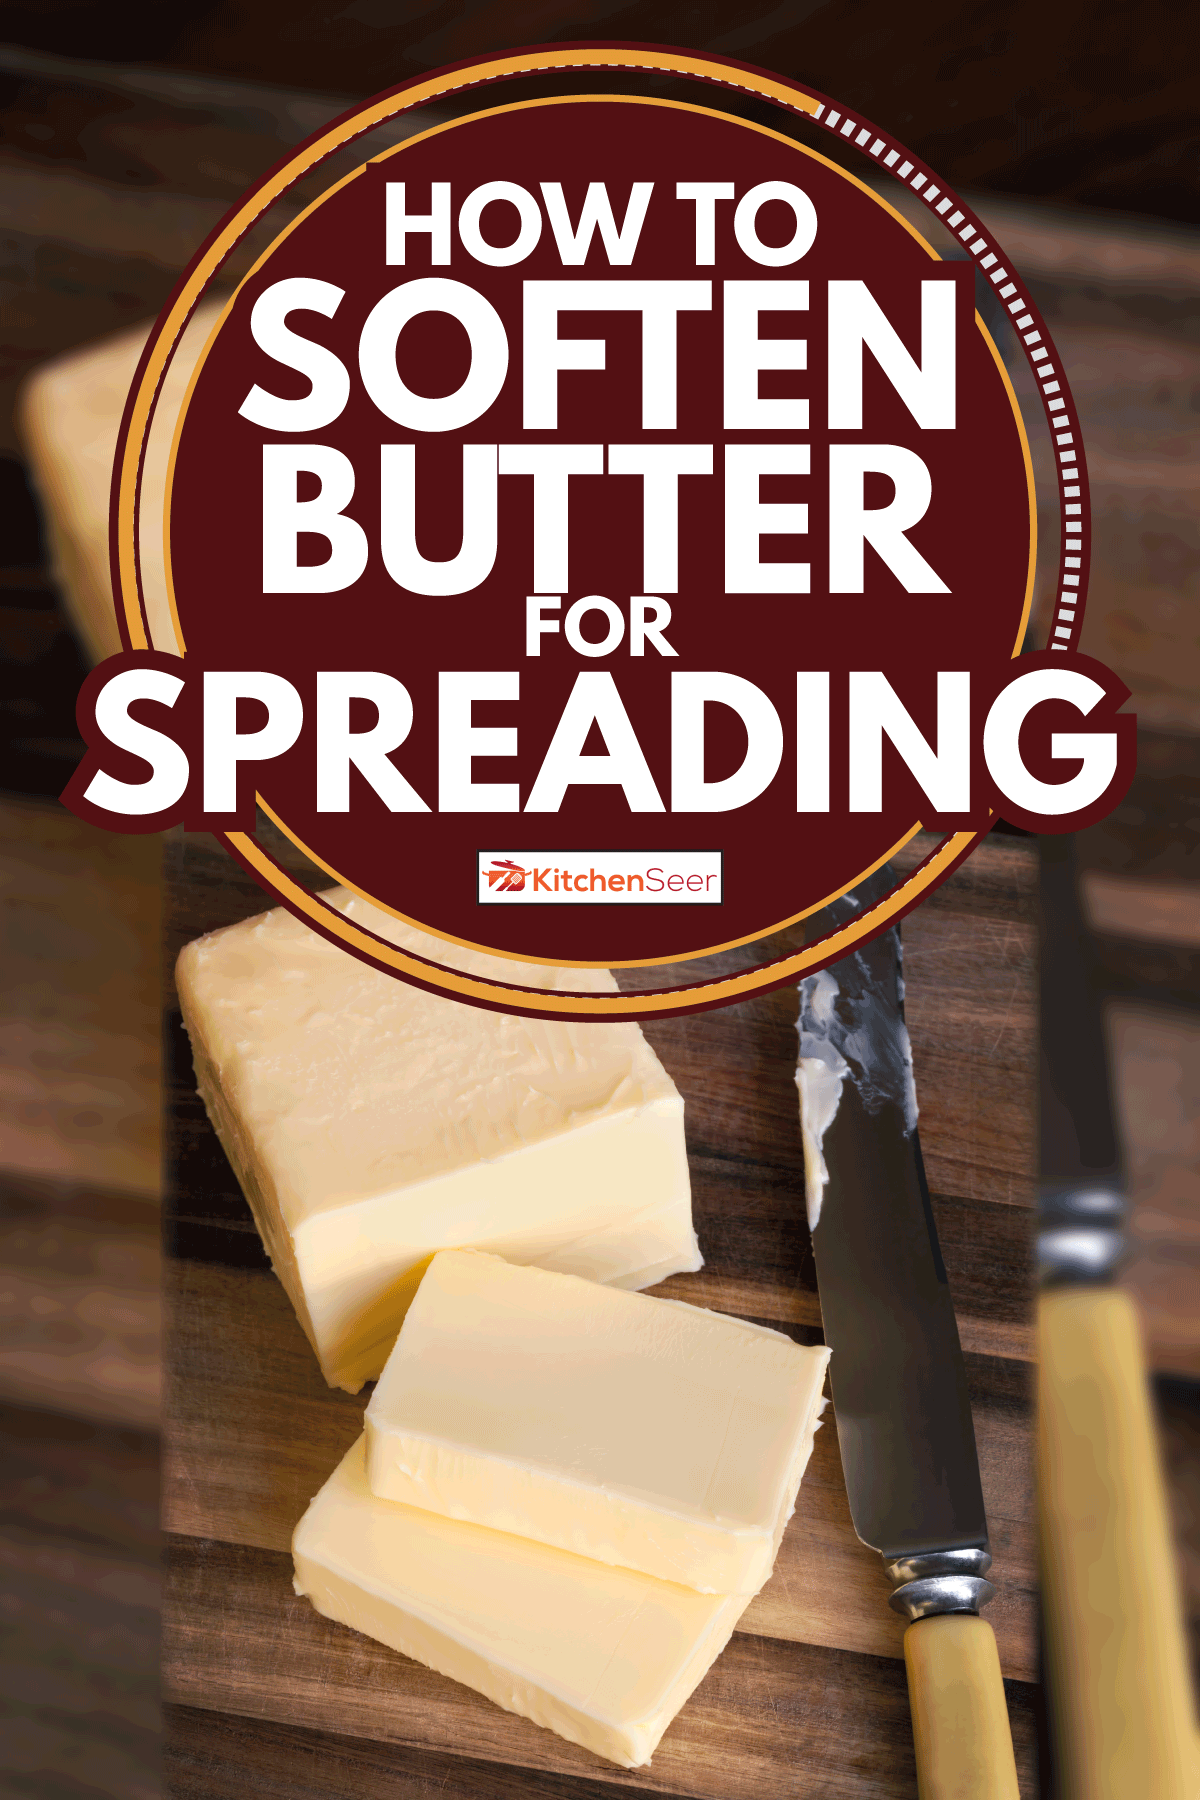 Butter on brown wooden Cutting Board. How To Soften Butter For Spreading